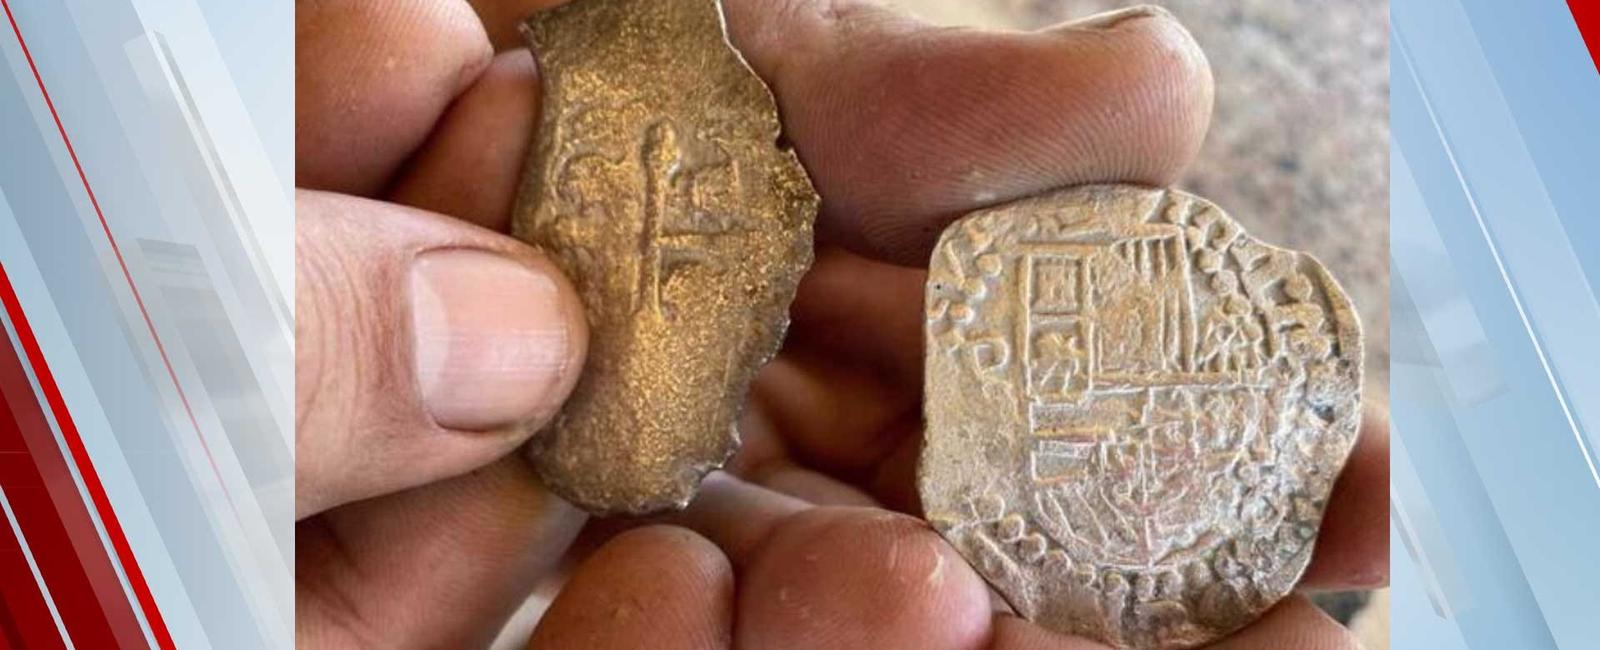 A man found a trove of spanish coins dating back to a 1715 shipwreck along a beach in florida